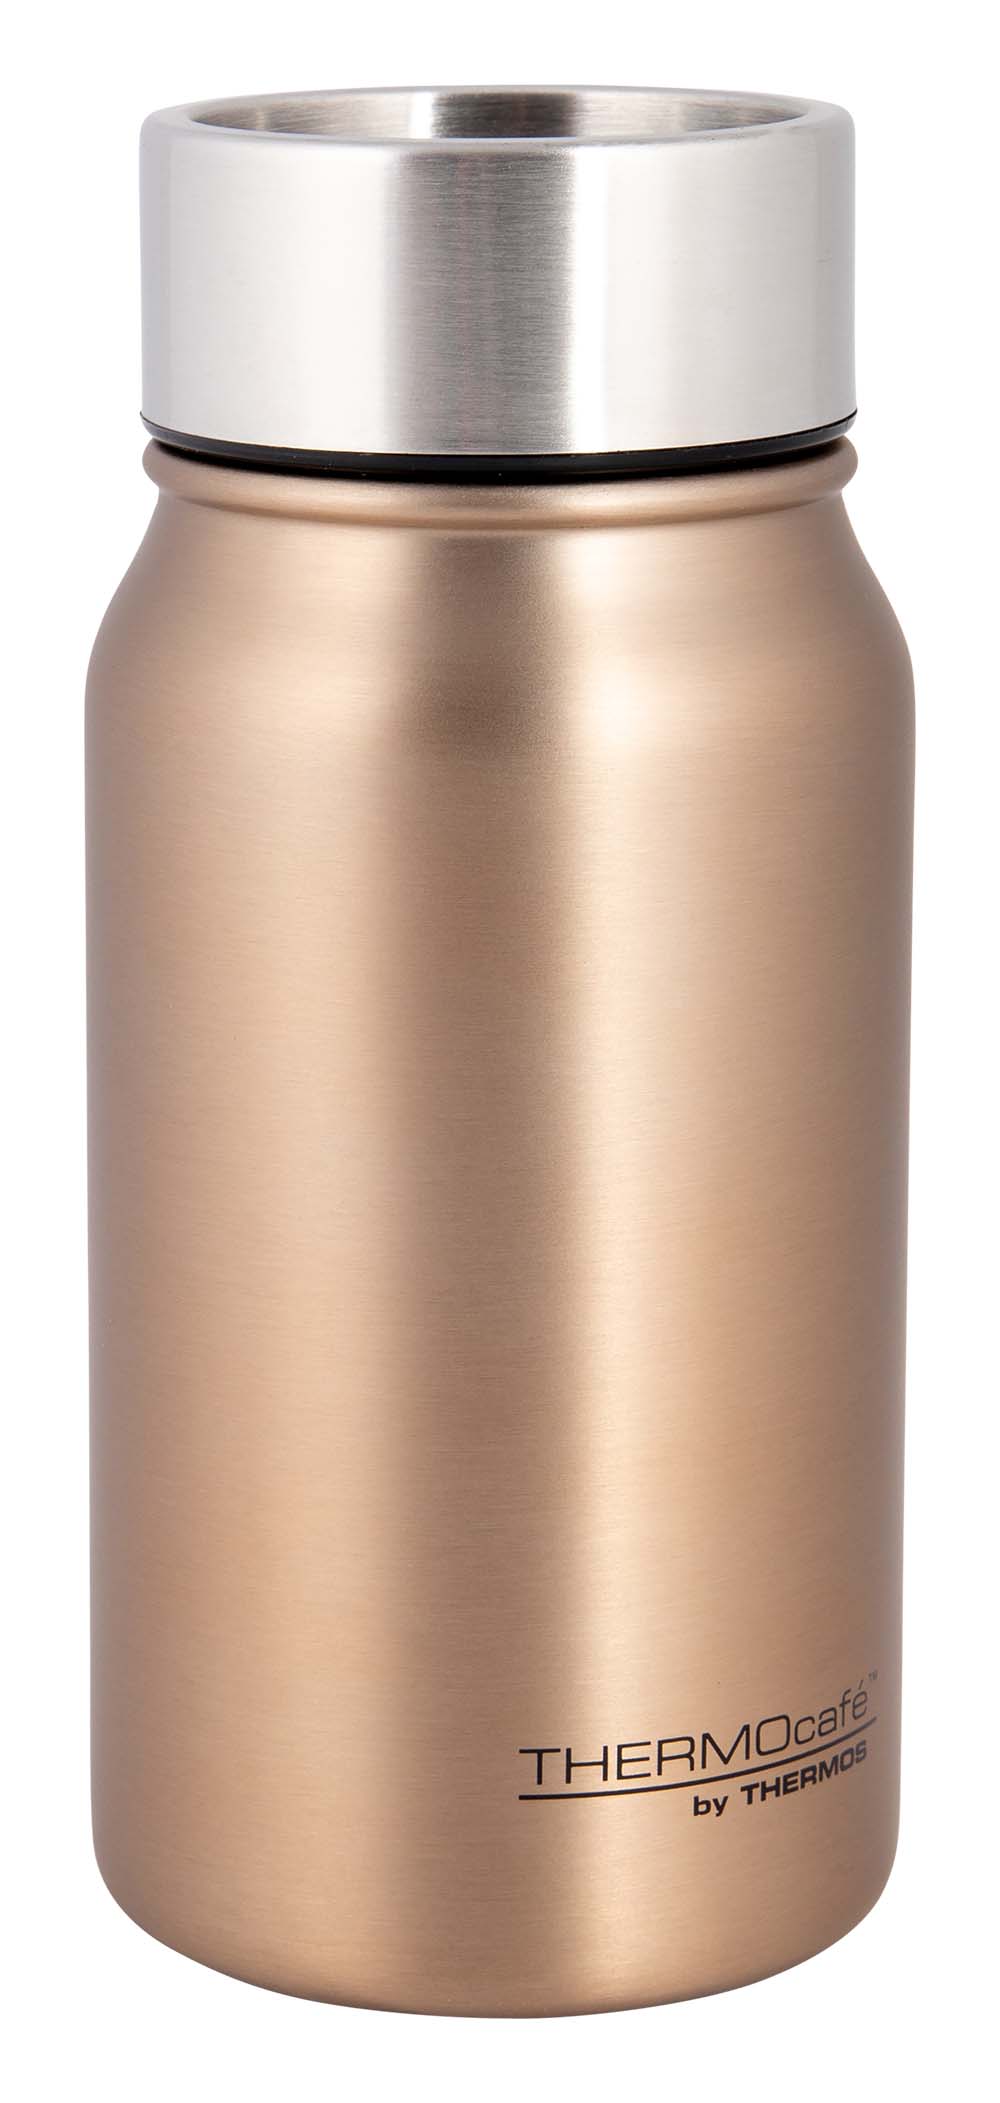 7398122 Absolutely leak-proof, even with carbonation. Rubber twist cap for easy, slip-free opening. The slim bottle design fits in any bag. High-quality stainless steel housing: unbreakable and flavor-neutral.